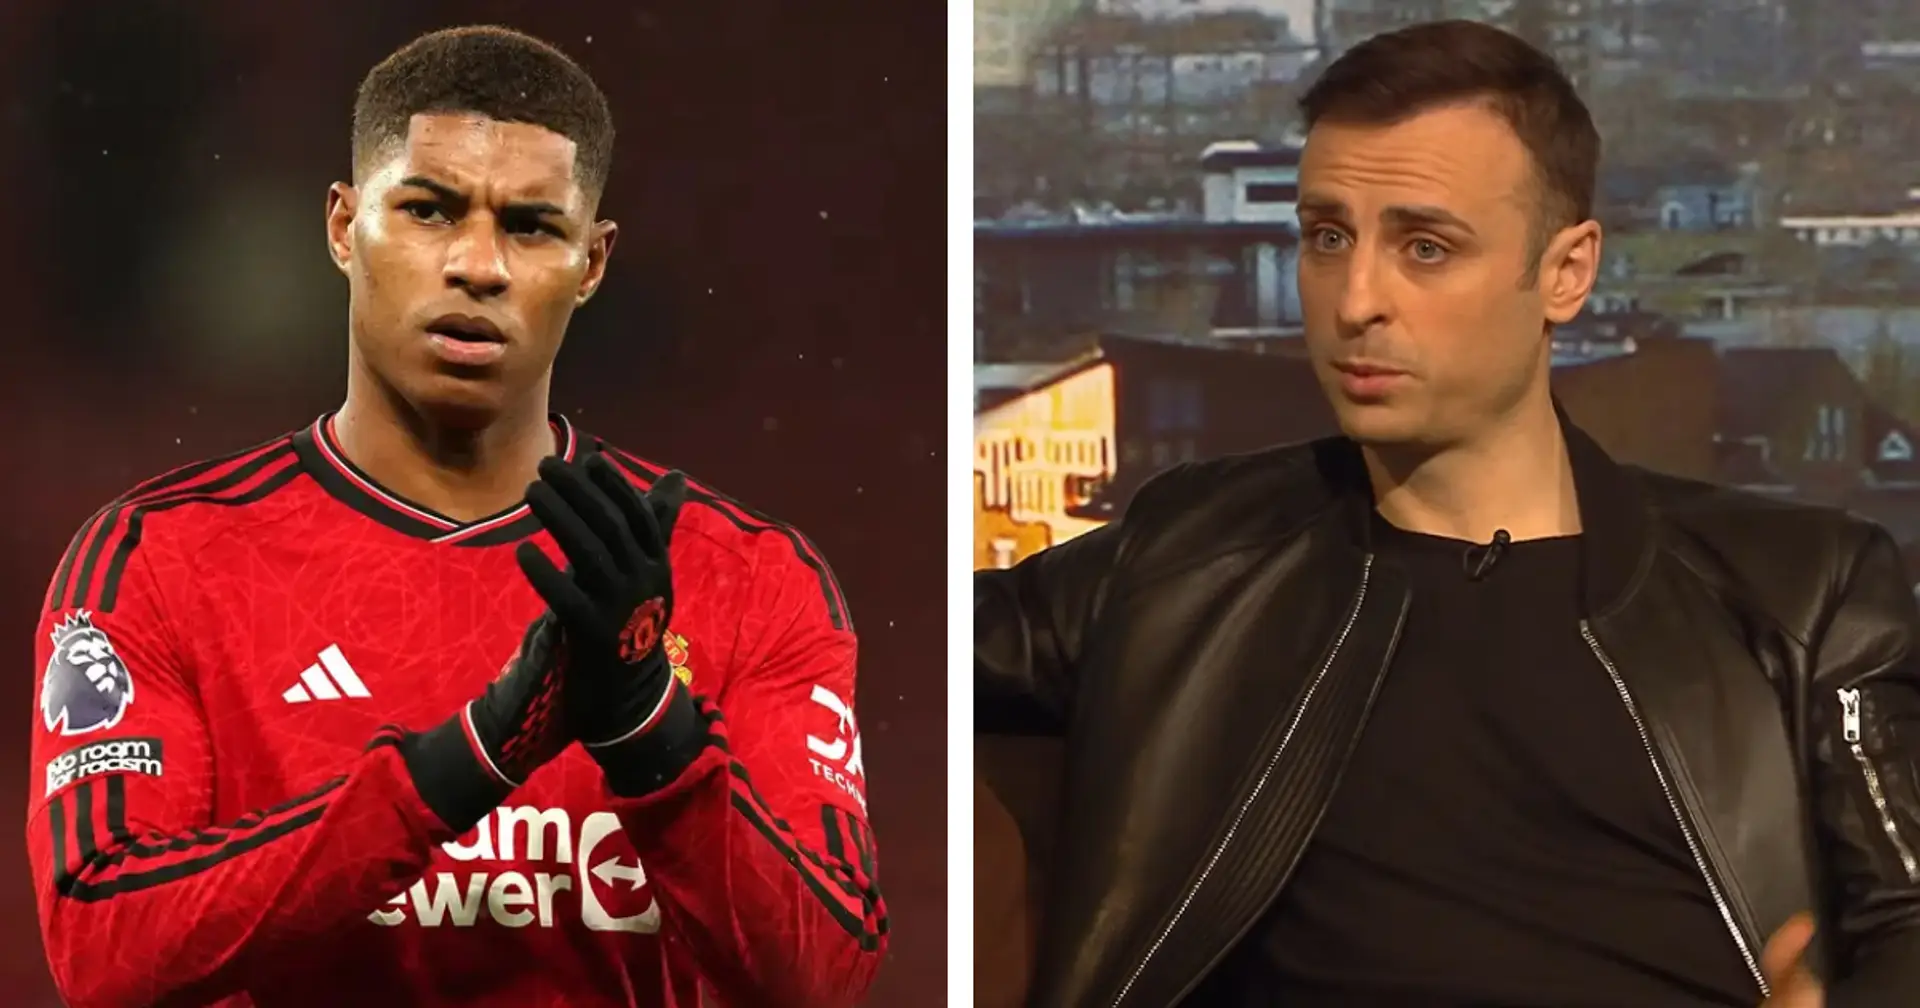 'He needs to be a leader': Dimitar Berbatov wants Rashford to get out of his comfort zone